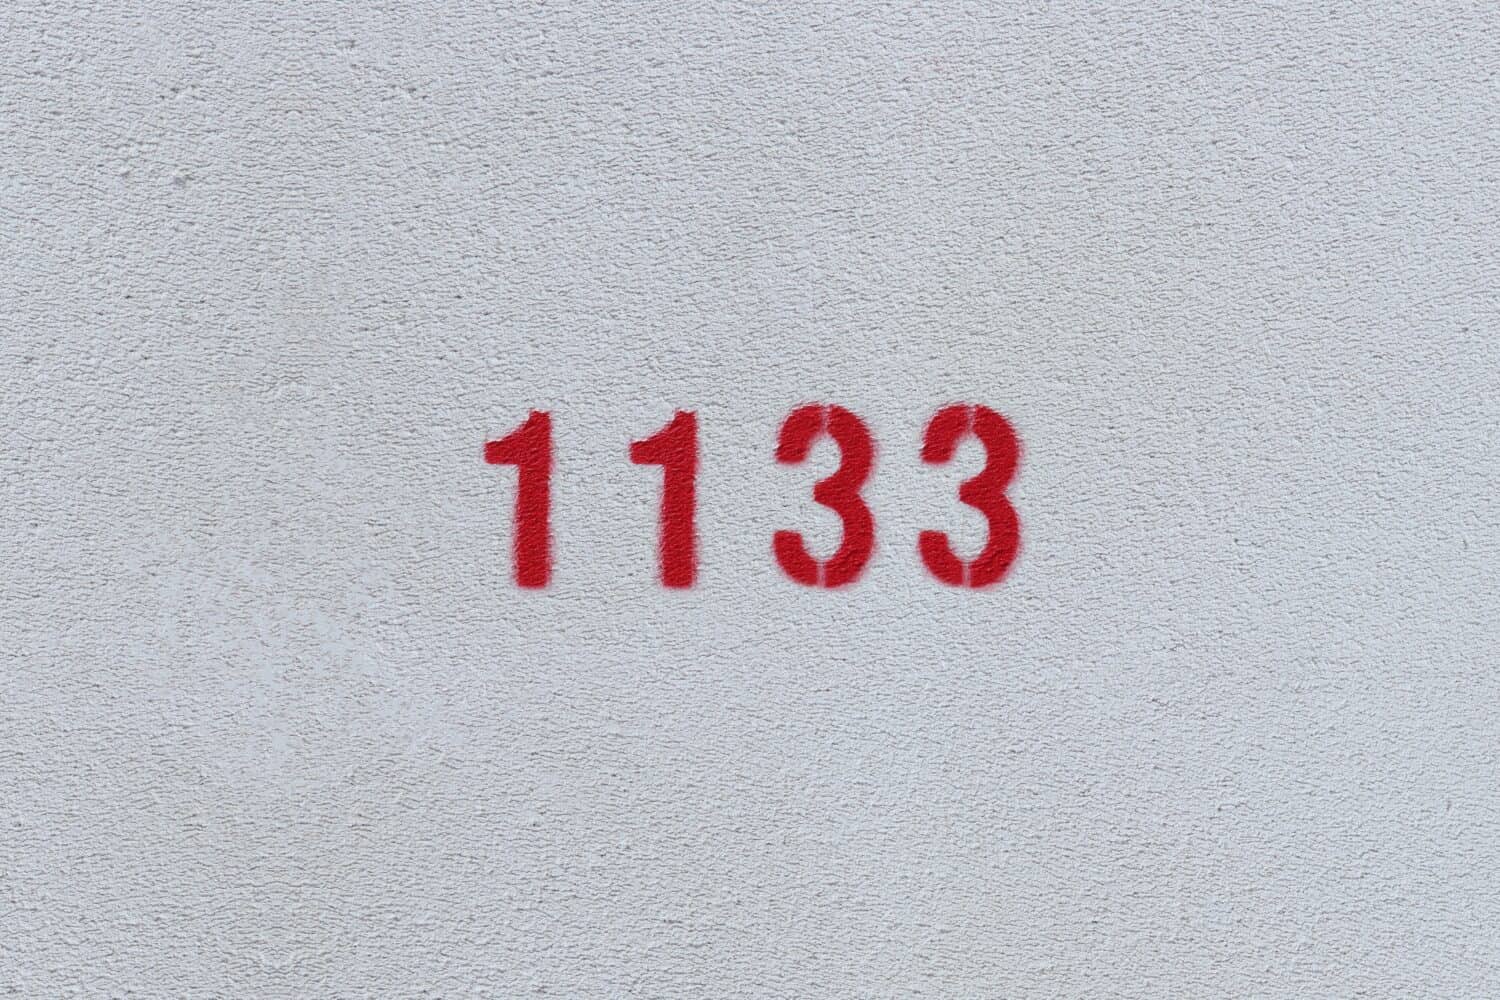 Red Number 1133 on the white wall. Spray paint.